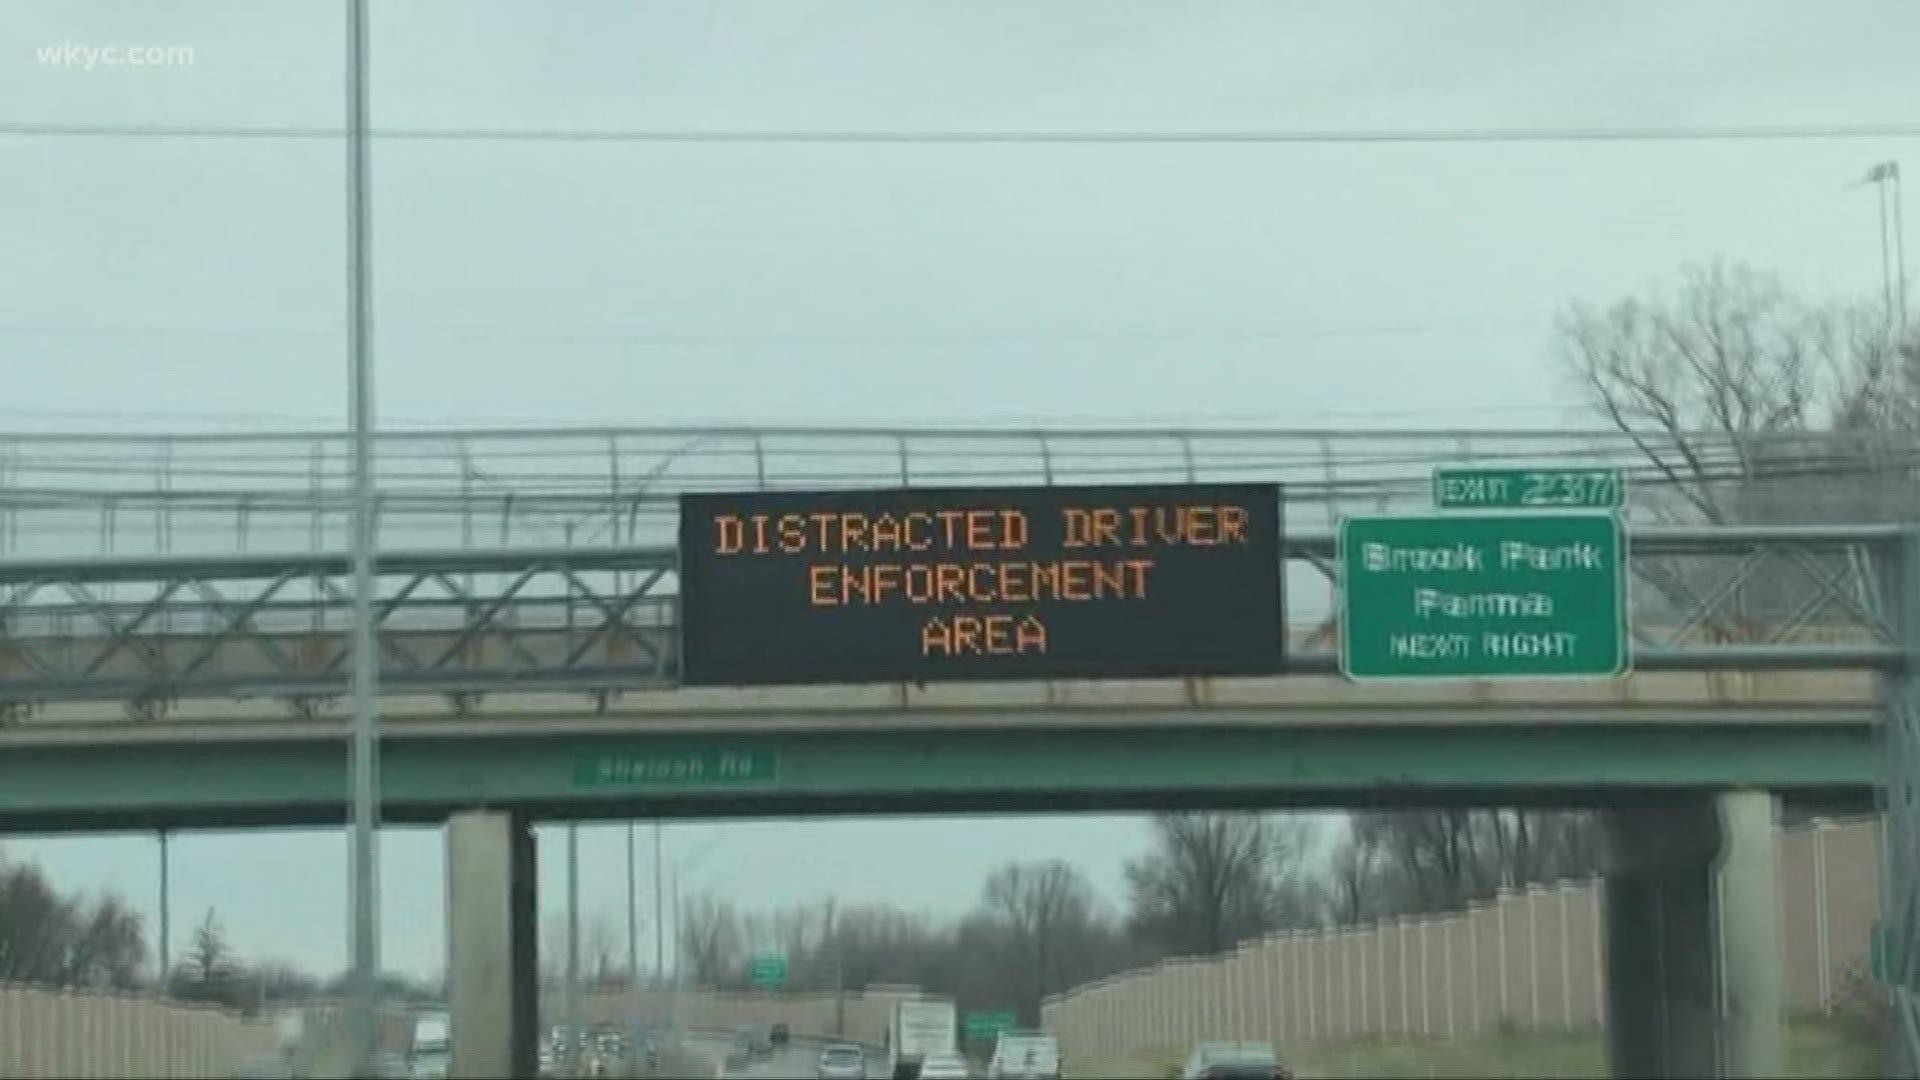 A new message went up on ODOT signs this week: “Distracted Driver Enforcement Area.” Are they checkpoints? Are there hidden cameras?